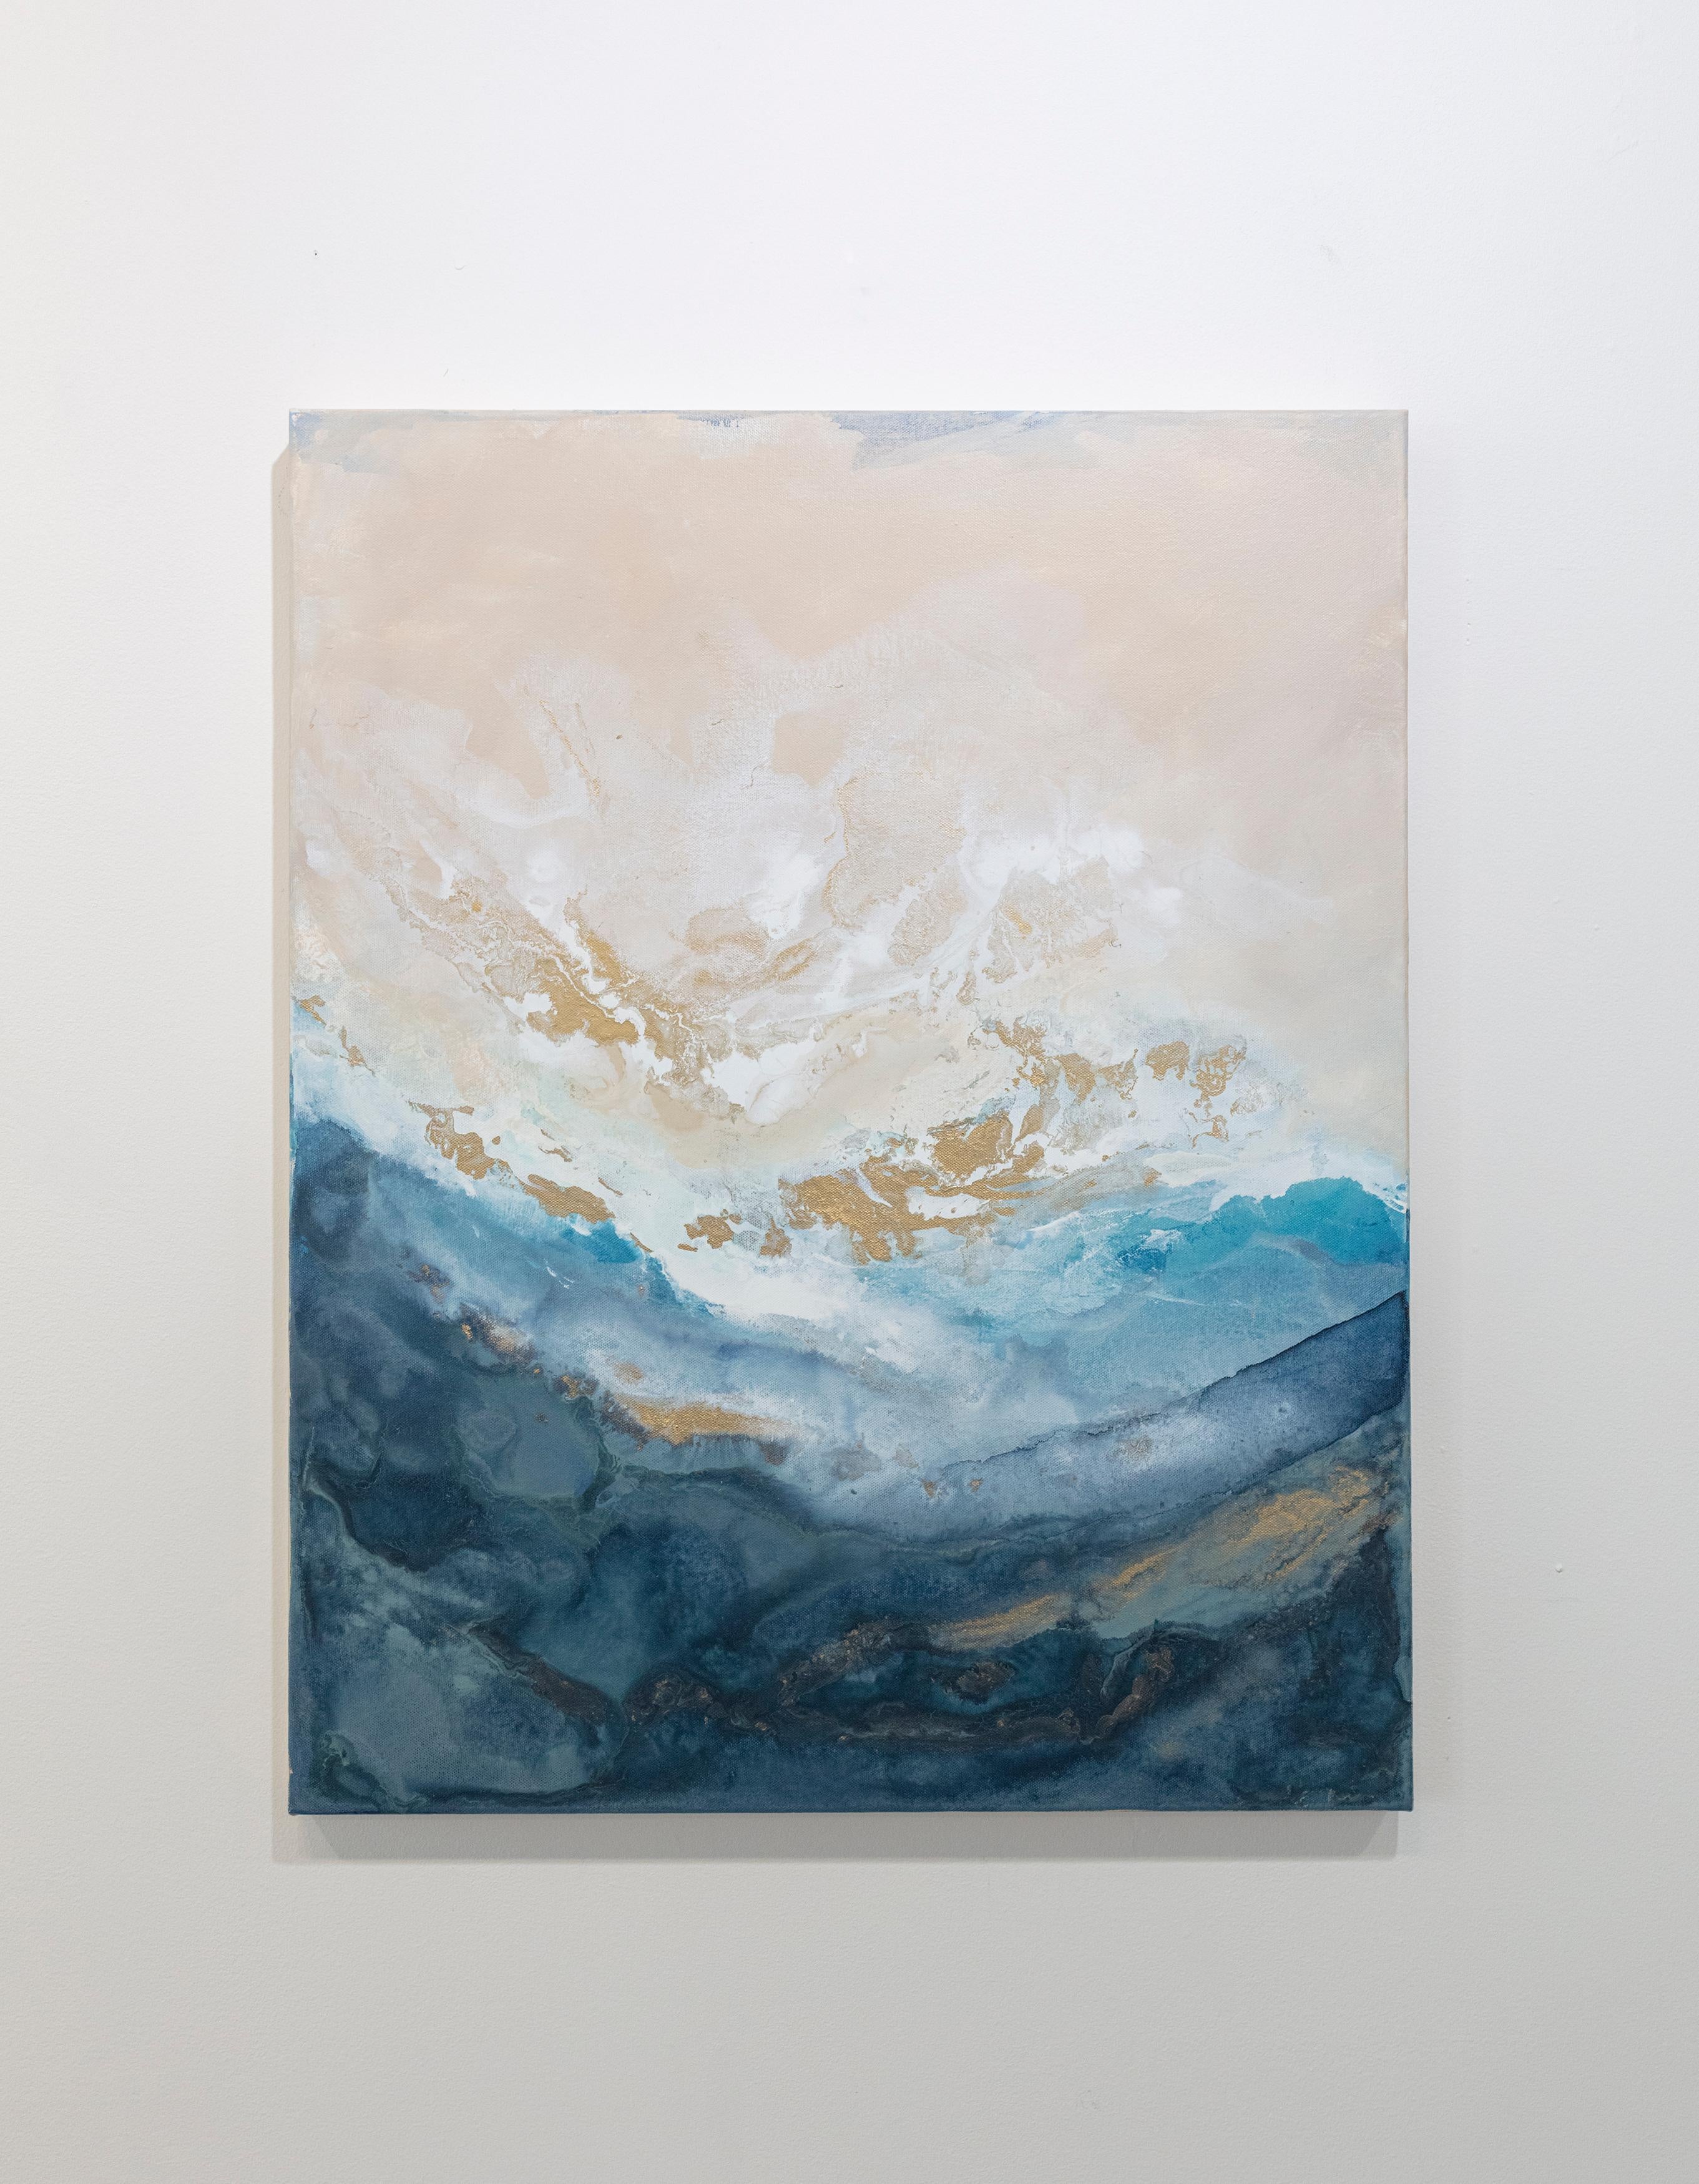 This abstract painting by Julia Contacessi features a light, coastal palette, with washes of varying blue tones on the bottom of the composition and light blush and white tones at the top. Metallic accents are layered through the middle of the